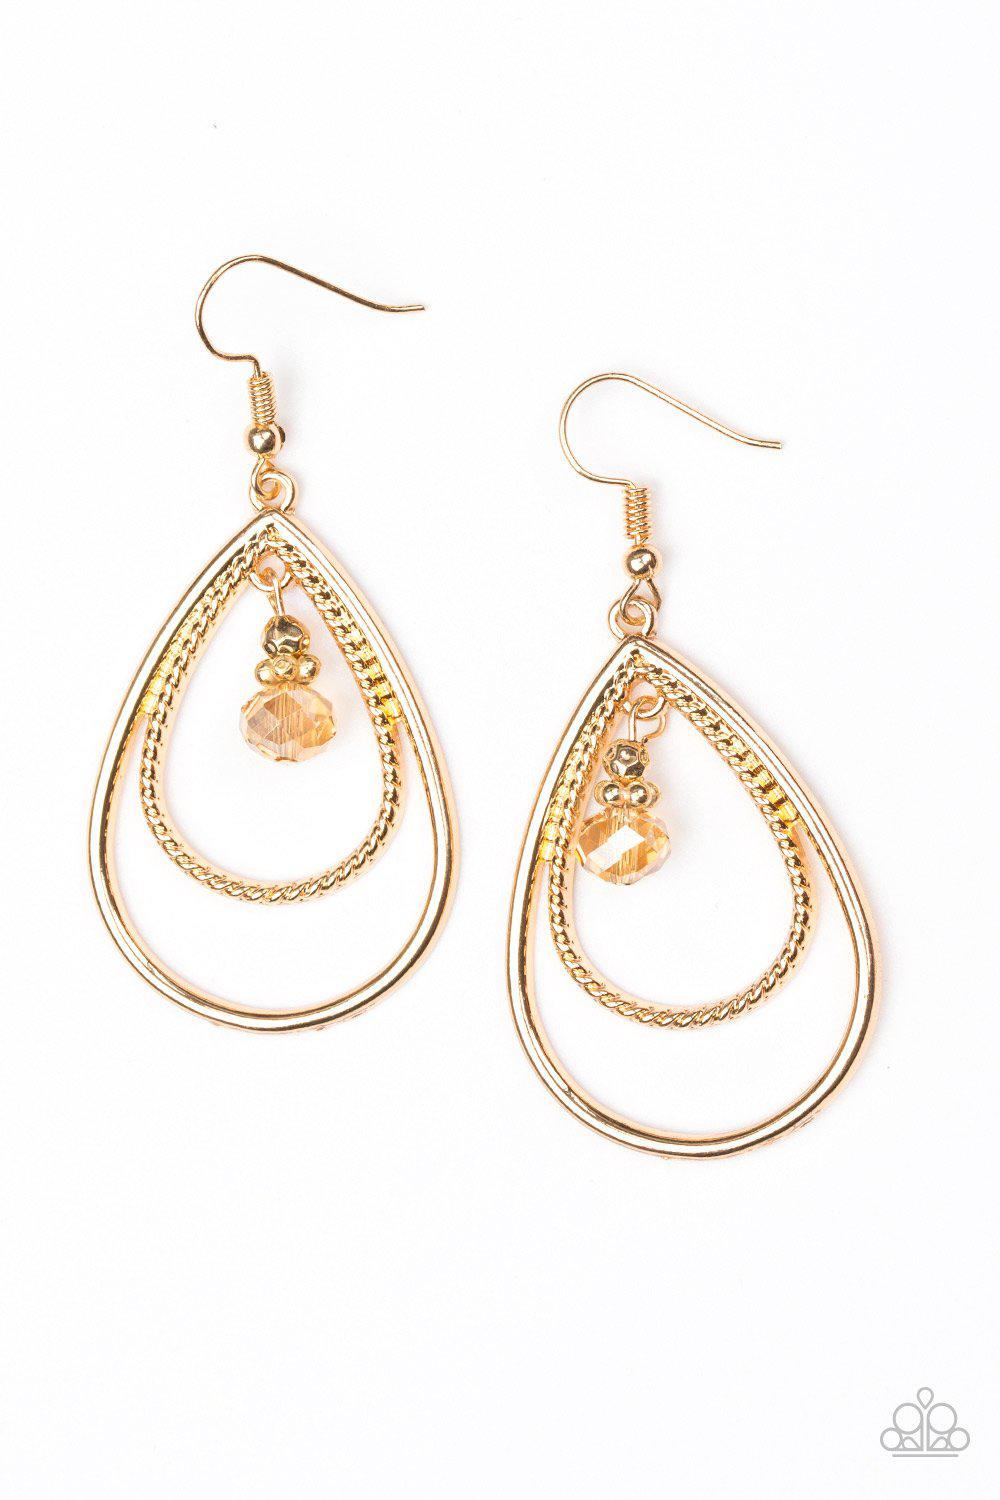 Paparazzi REIGN On My Parade Gold Earrings | CarasShop